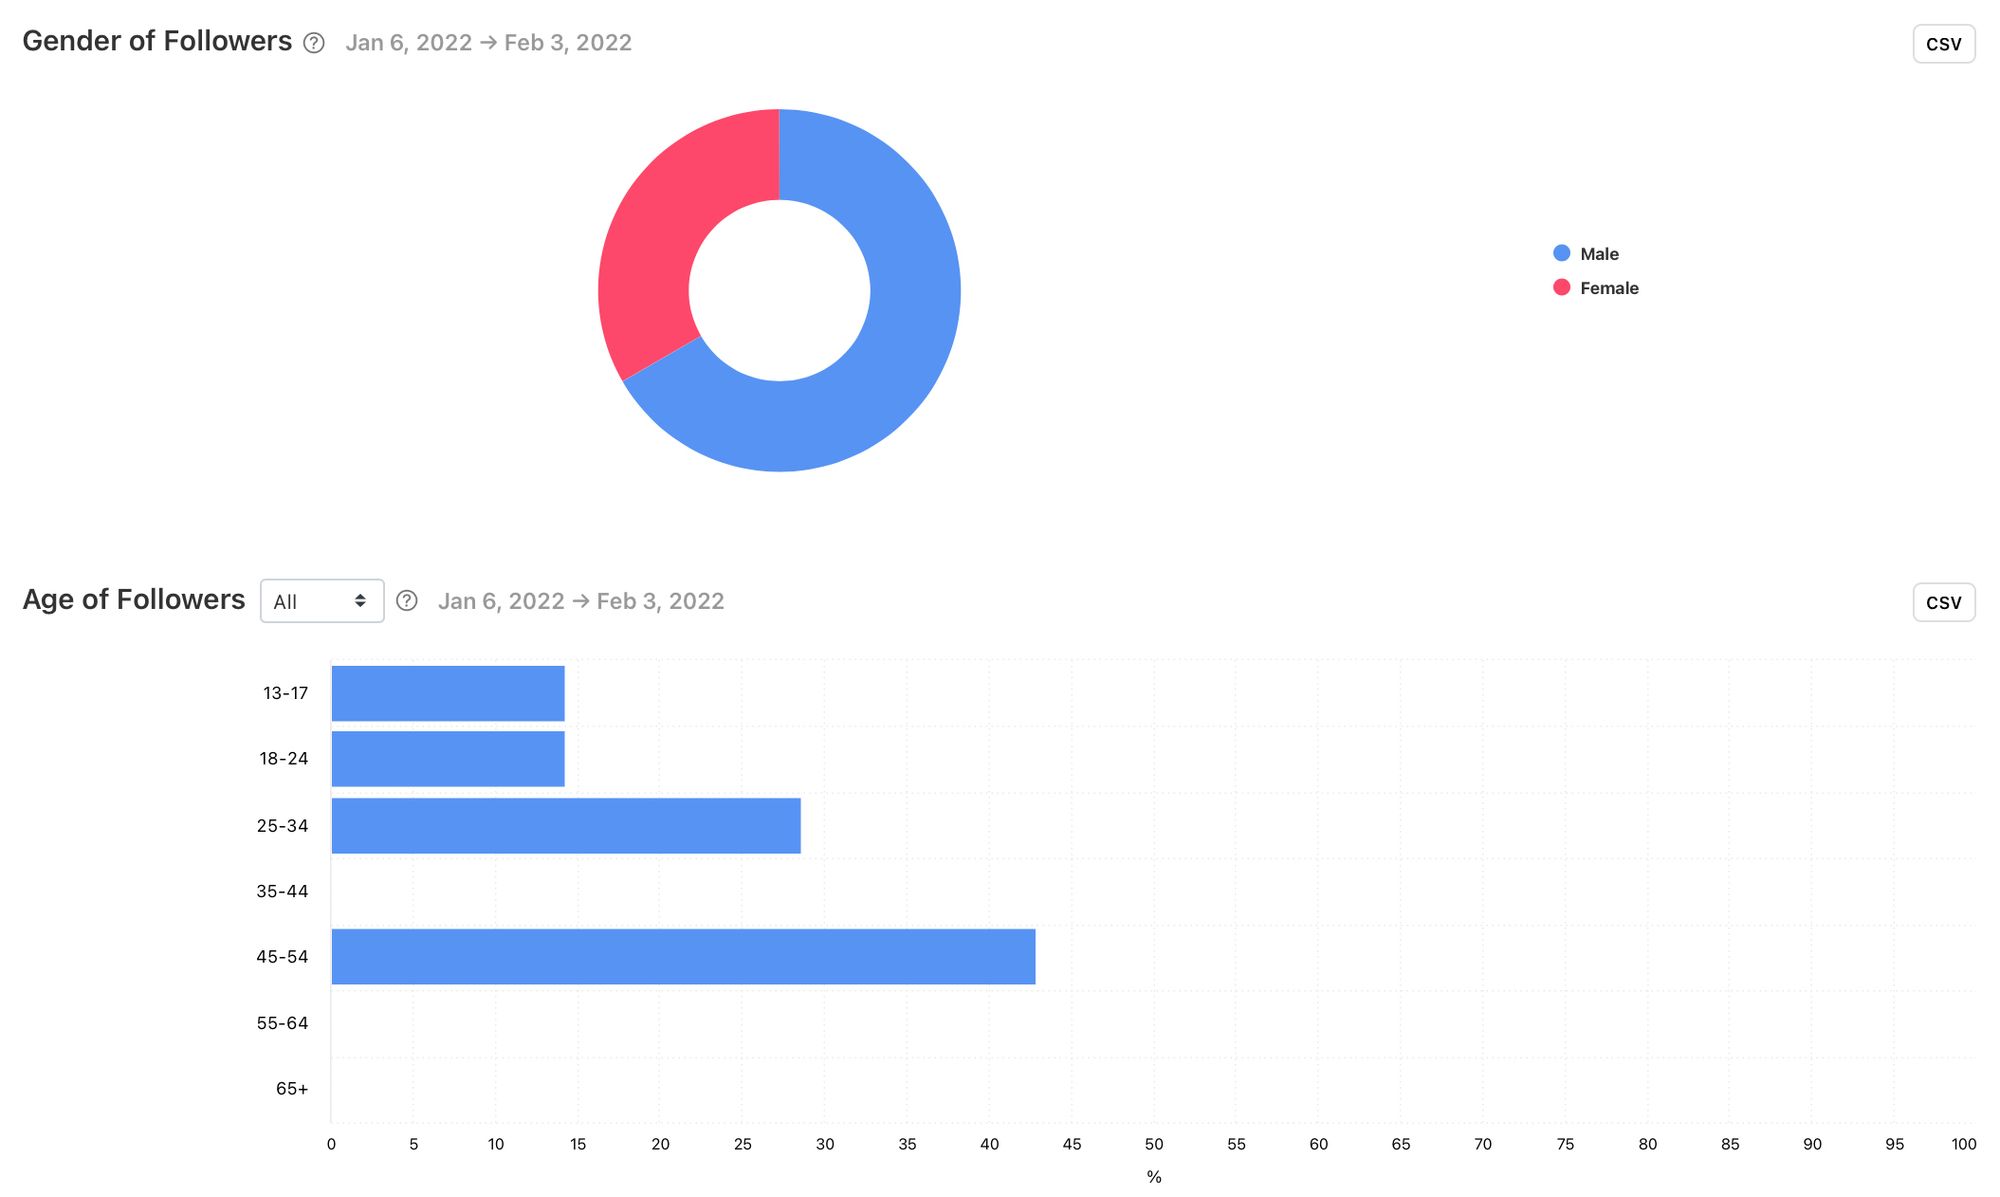 Gender and age of followers demographic graphs by Minter.io for social media profiles